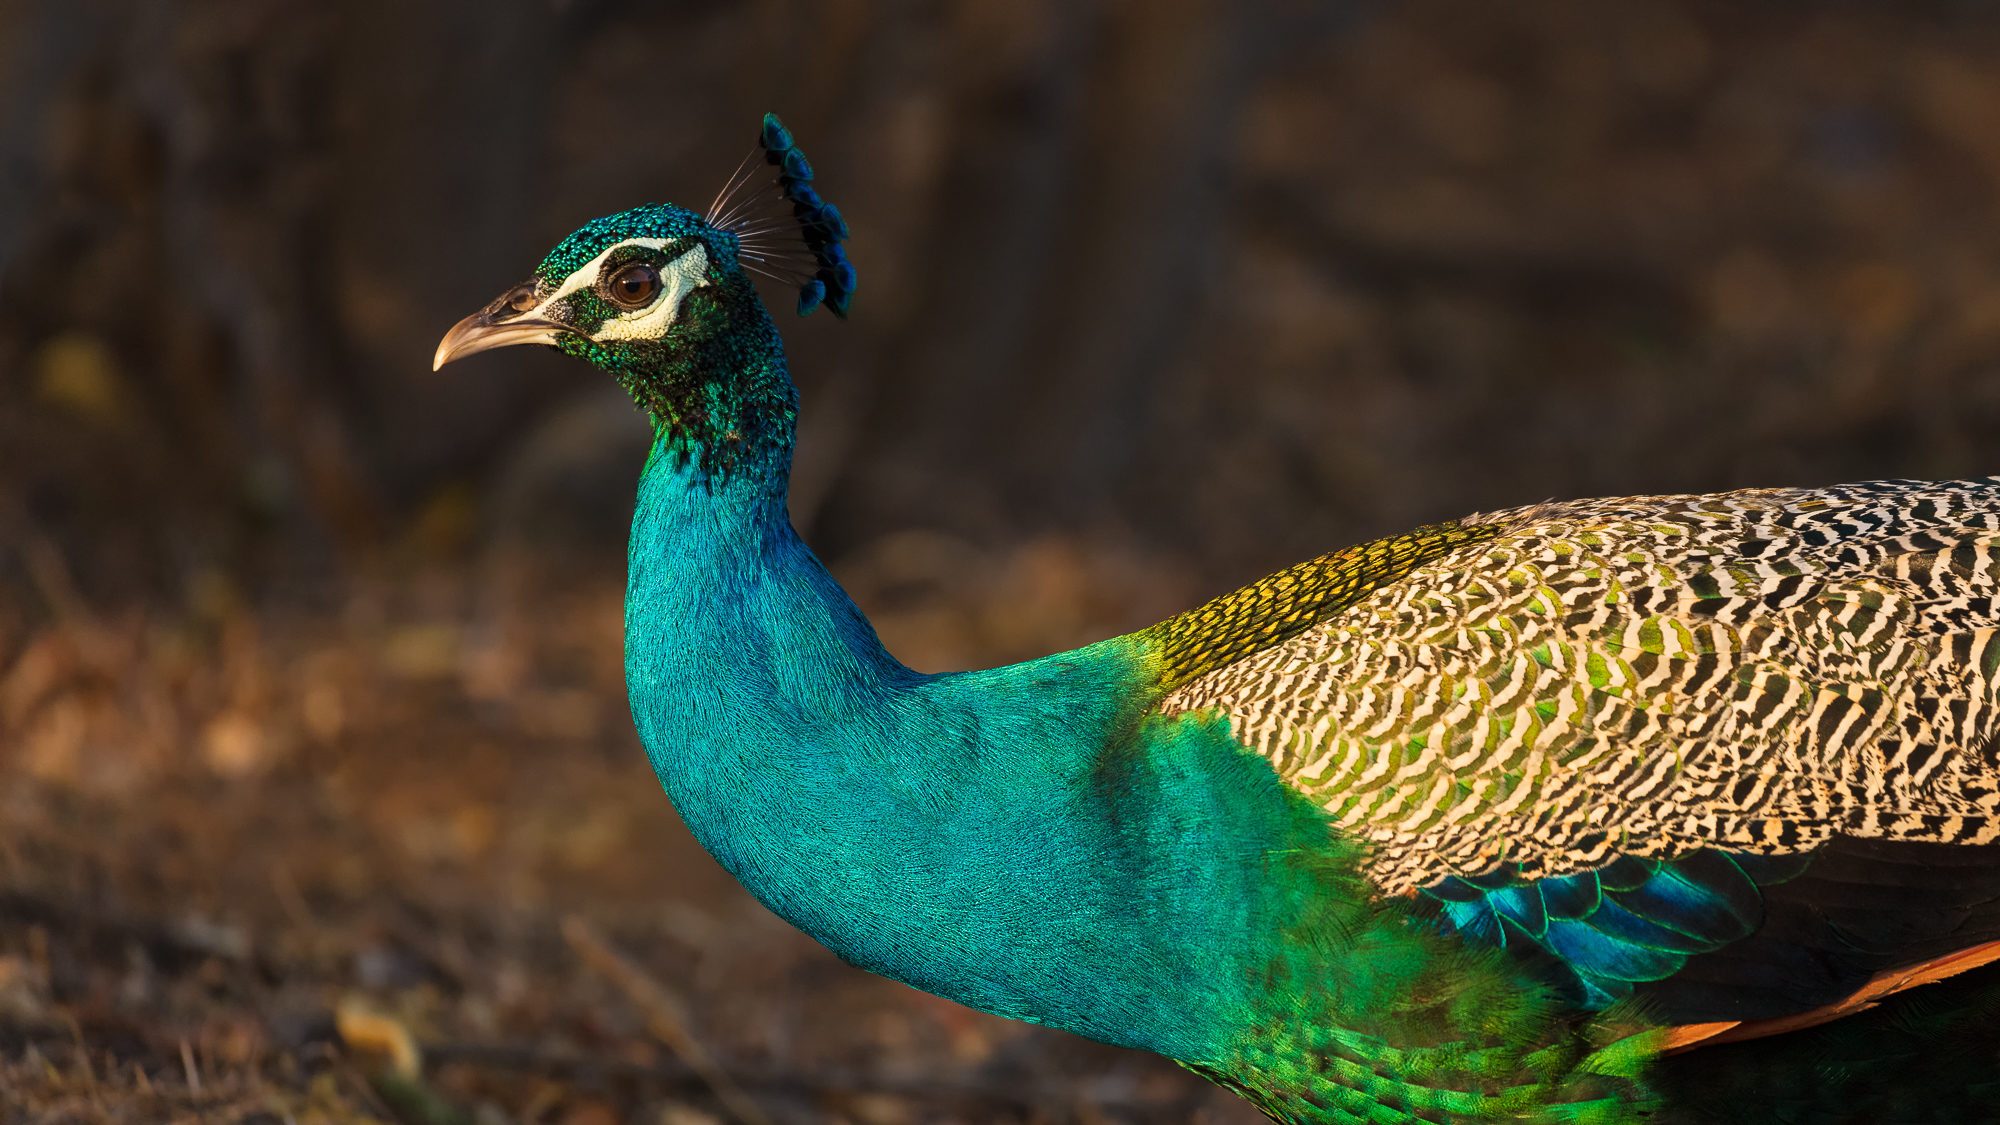 An indian peacock struts along a forest floor, Tamil Nadu, India.